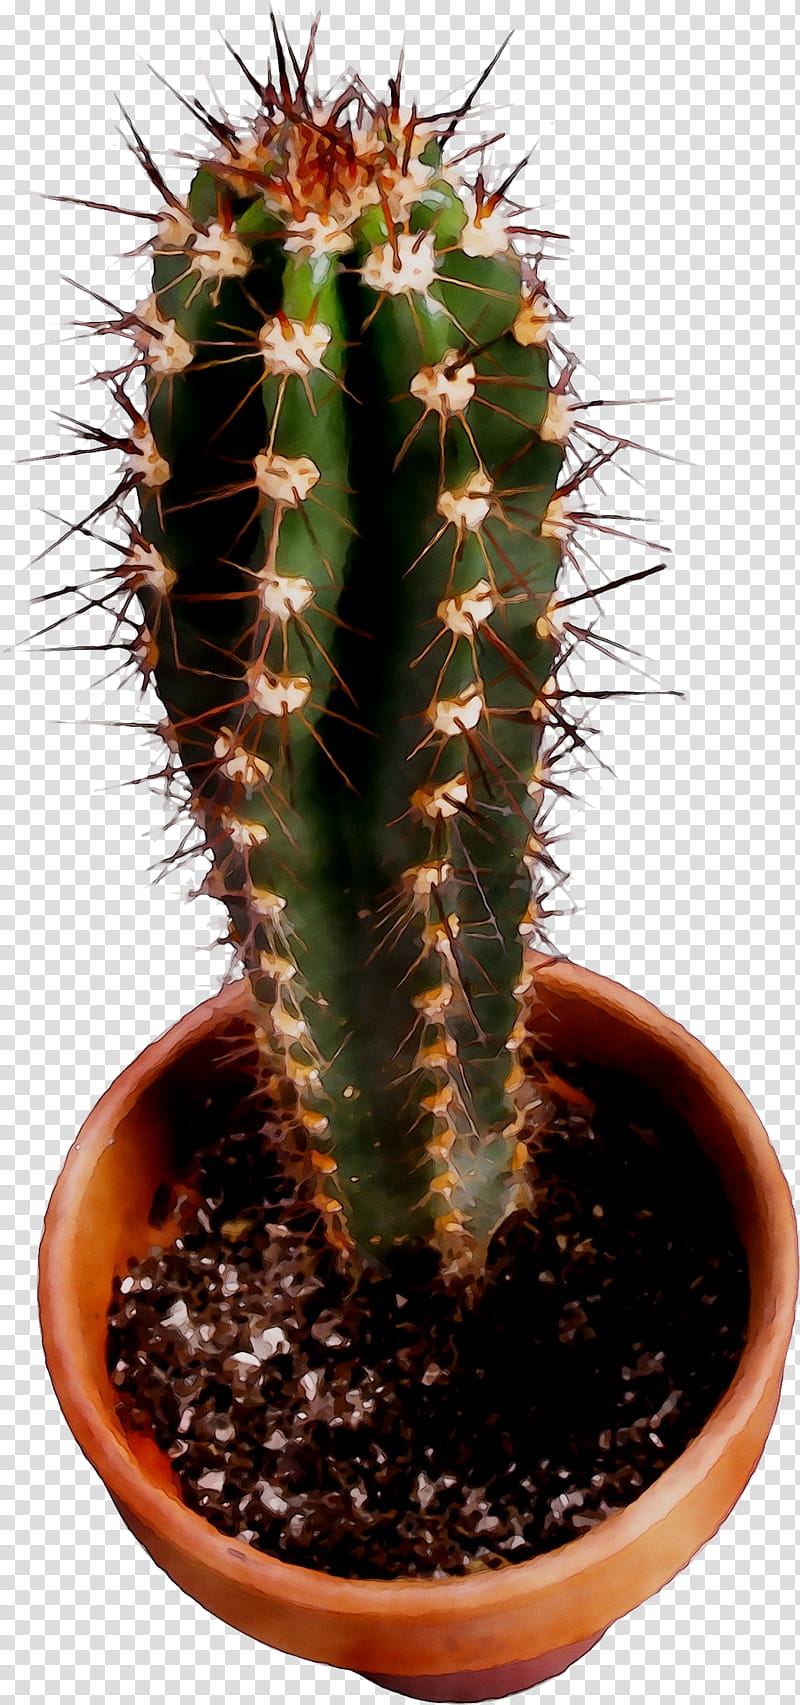 Cactus, San Pedro Cactus, Triangle Cactus, Prickly Pear, Thorns Spines And Prickles, Echinocereus, Flowerpot, Houseplant transparent background PNG clipart